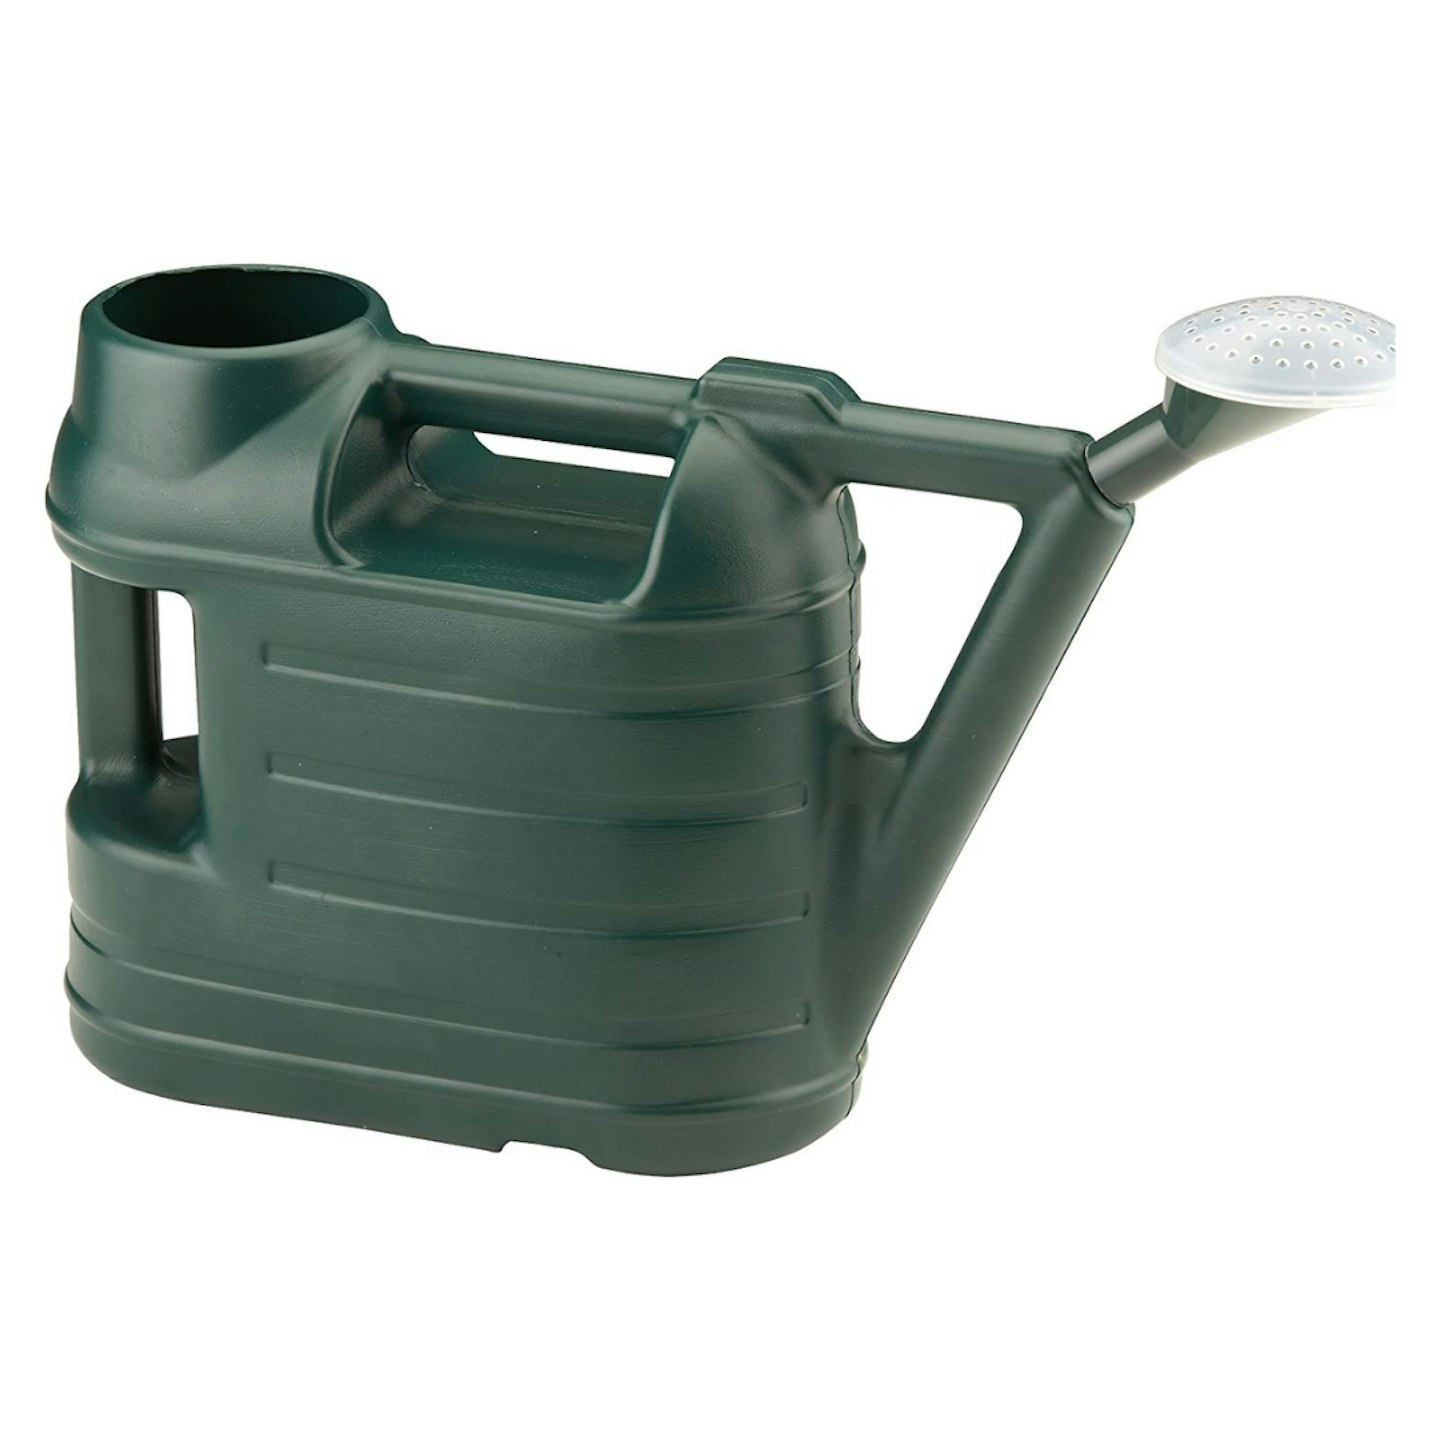 Ward 6.5L Budget Space Watering Can